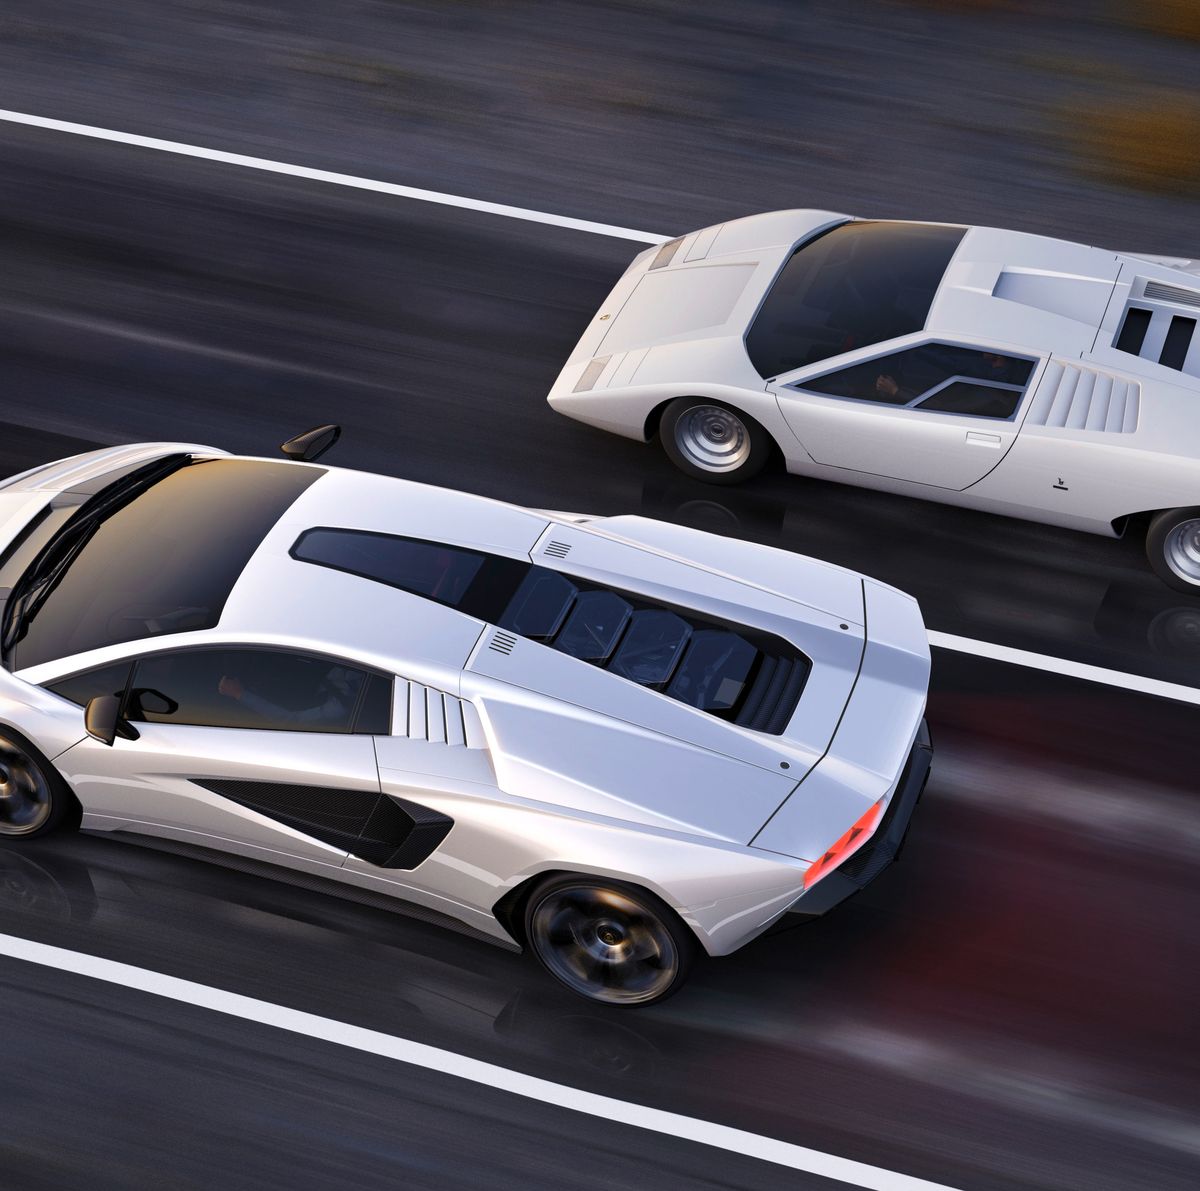 Why Lamborghini Decided to Bring Back the Countach